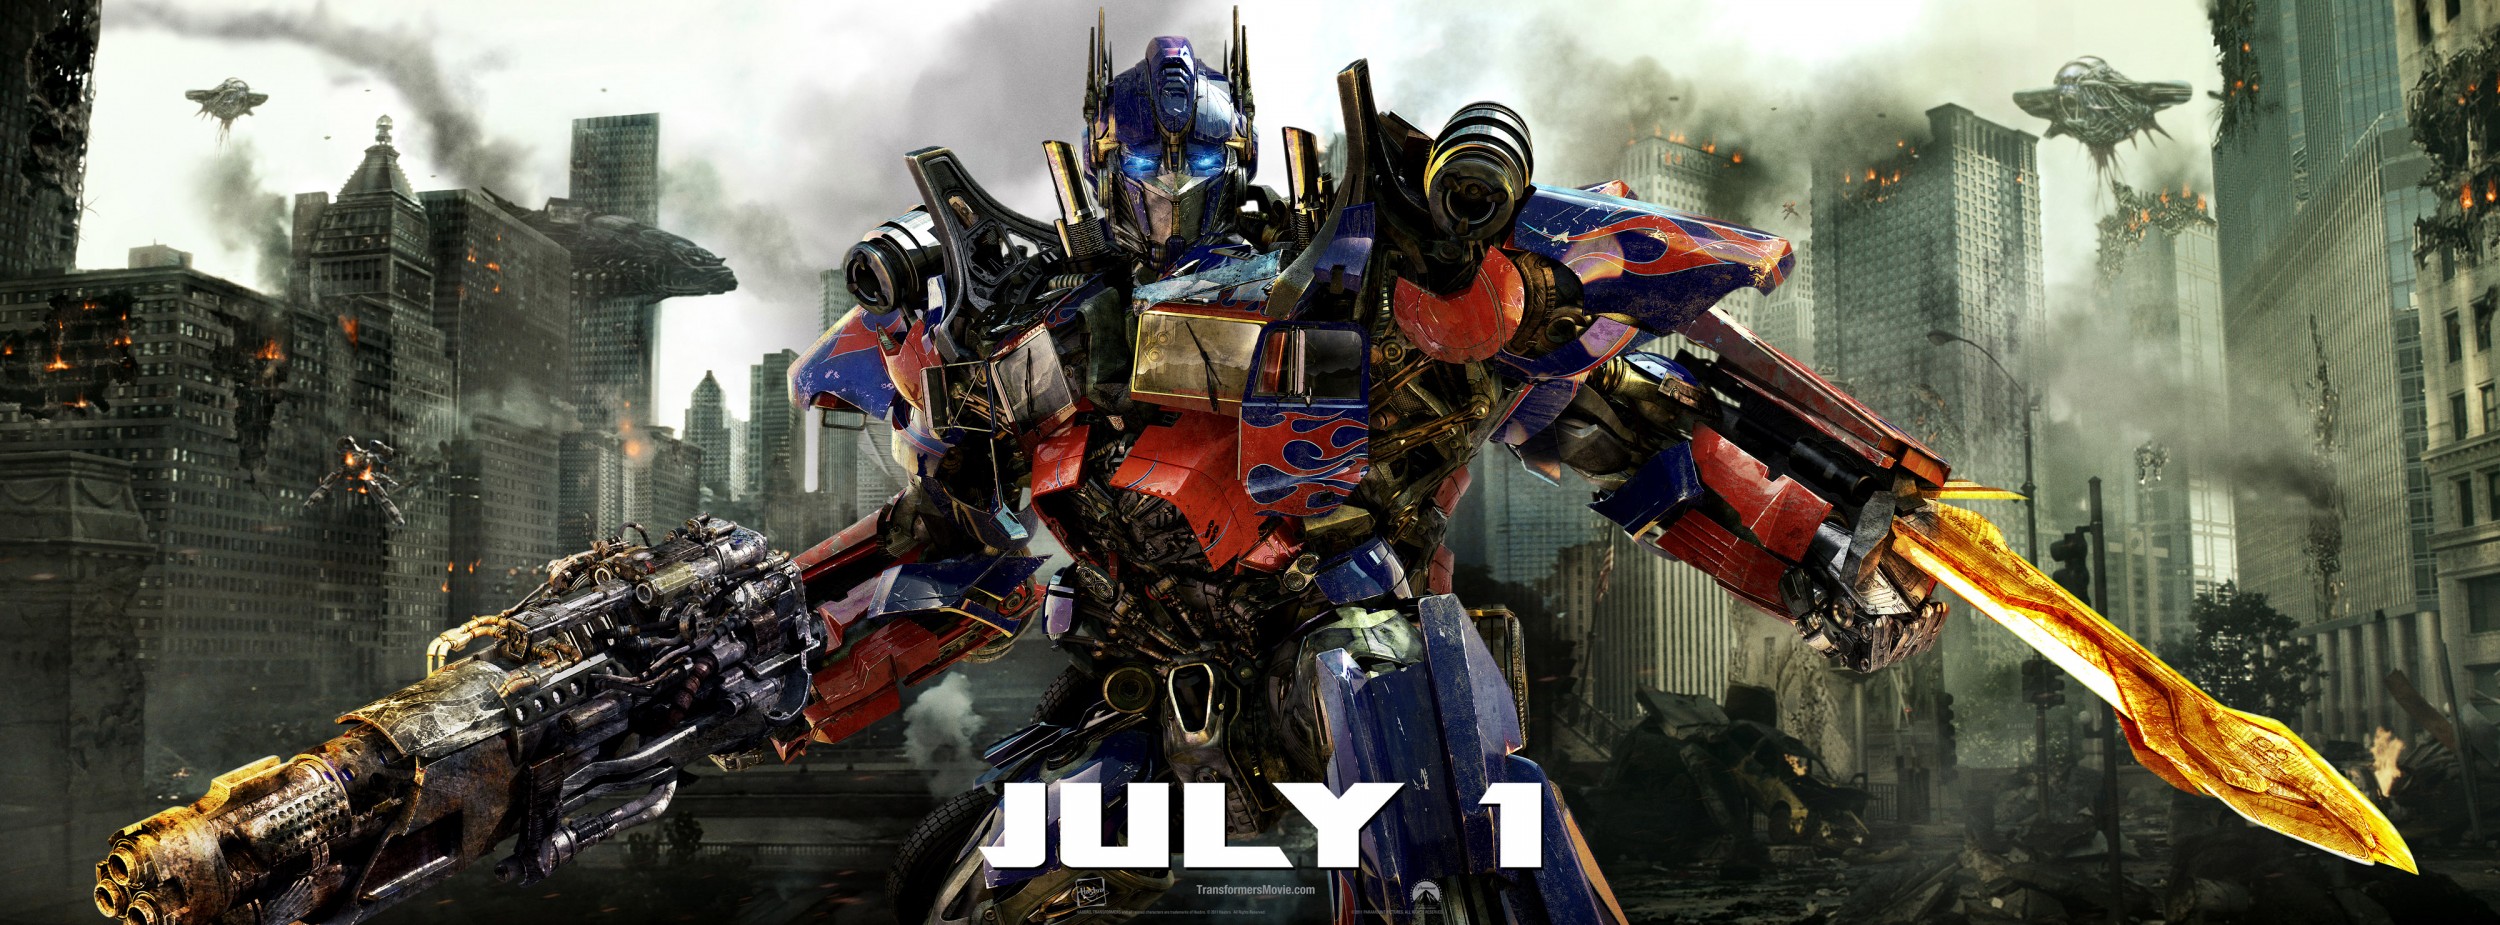 Mega Sized Movie Poster Image for Transformers: Dark of the Moon (#2 of 9)